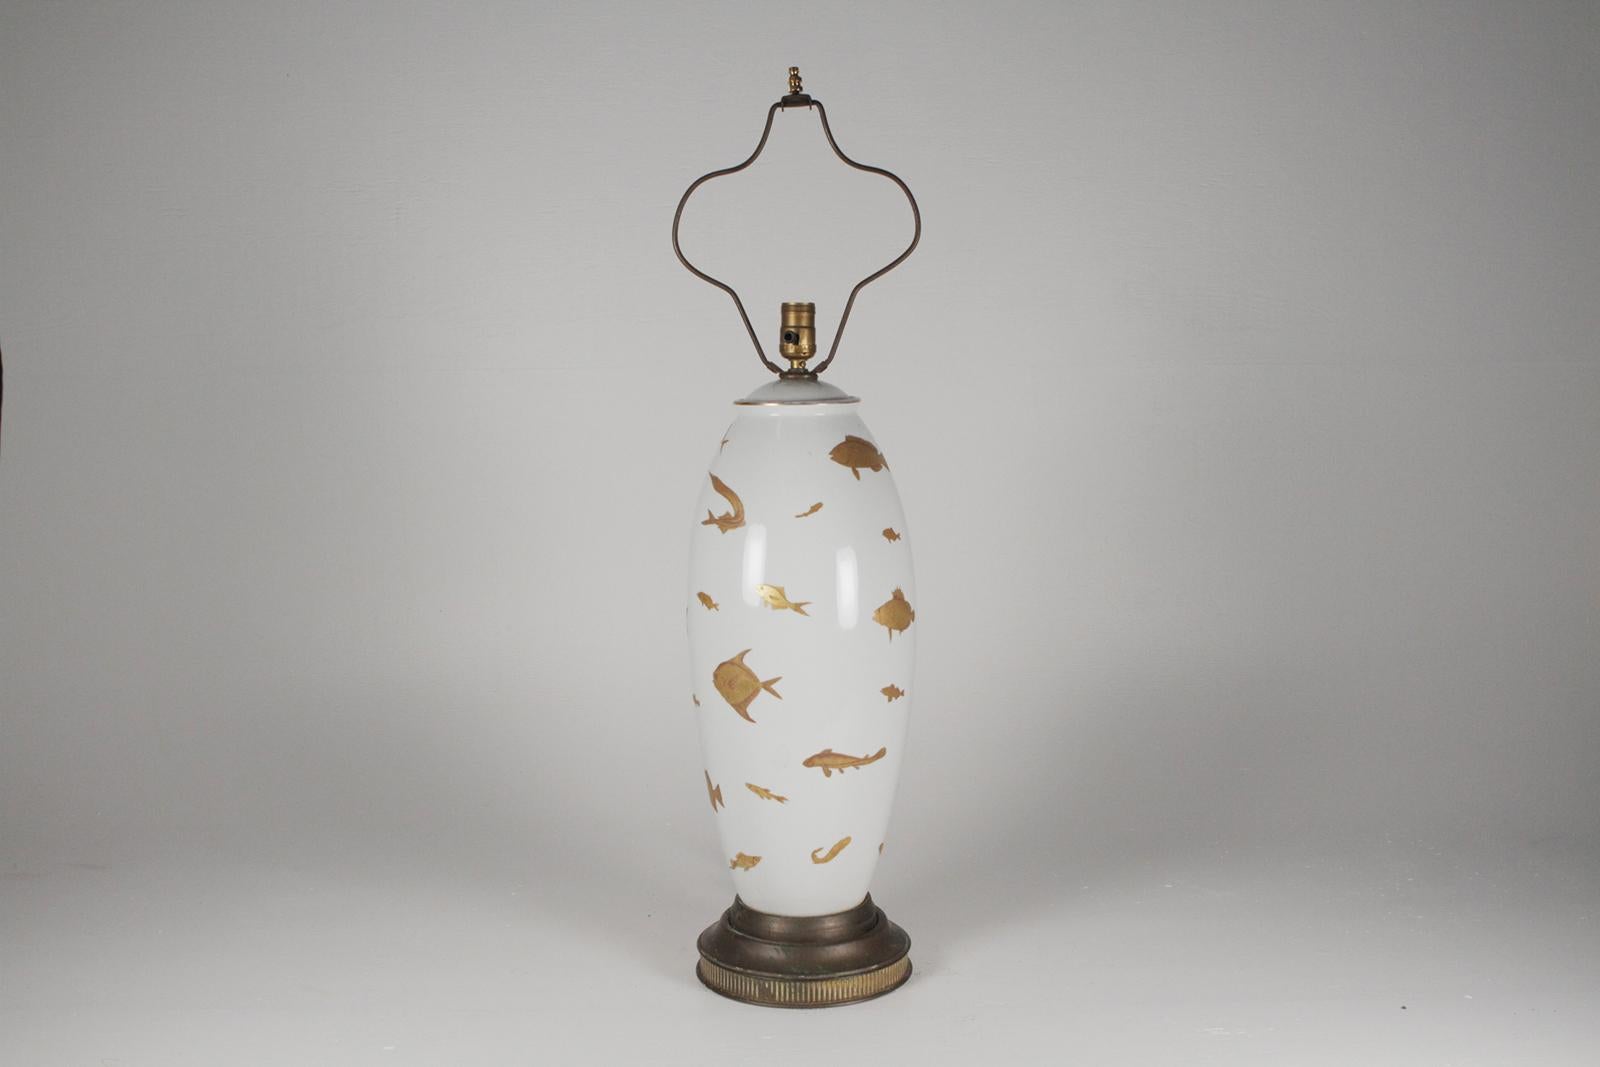 Midcentury porcelain hand-painted table lamp with gilt painted fish.
Dimensions: 25.5” H to socket x 9” diameter, height with harp 33.5”.
Custom made shade for the lamp